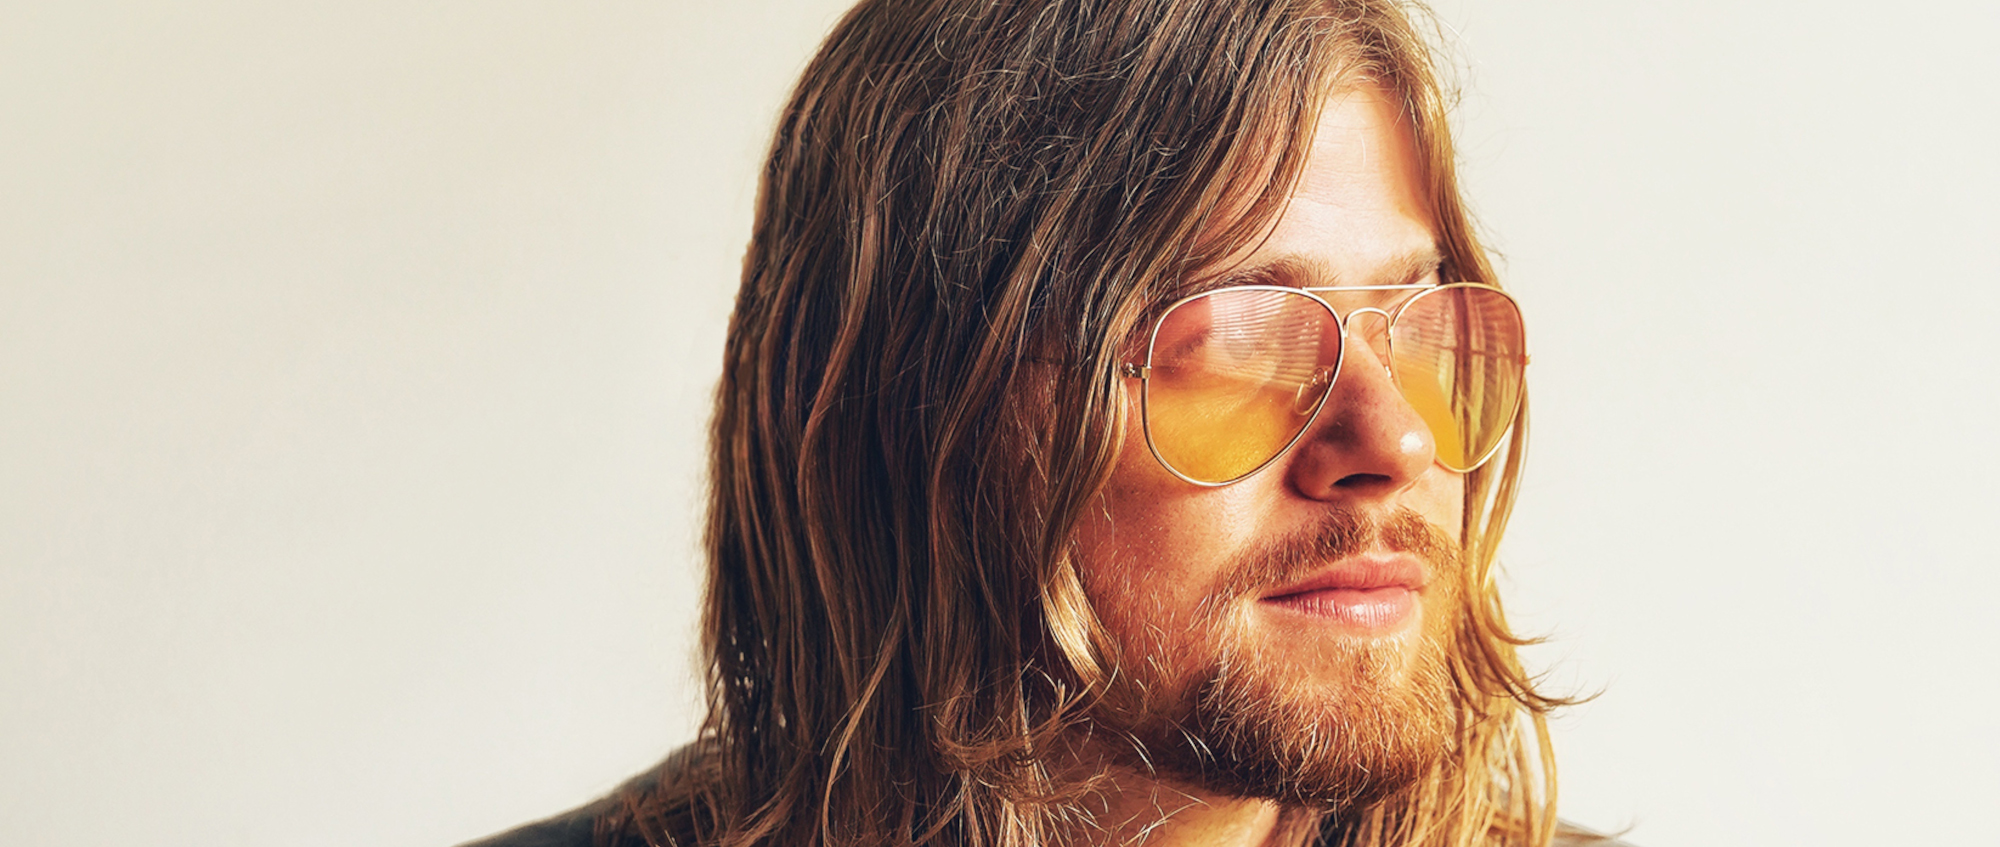 Daily Discovery: Andrew Leahey Tackles Love on the Road in “Good at Gone”